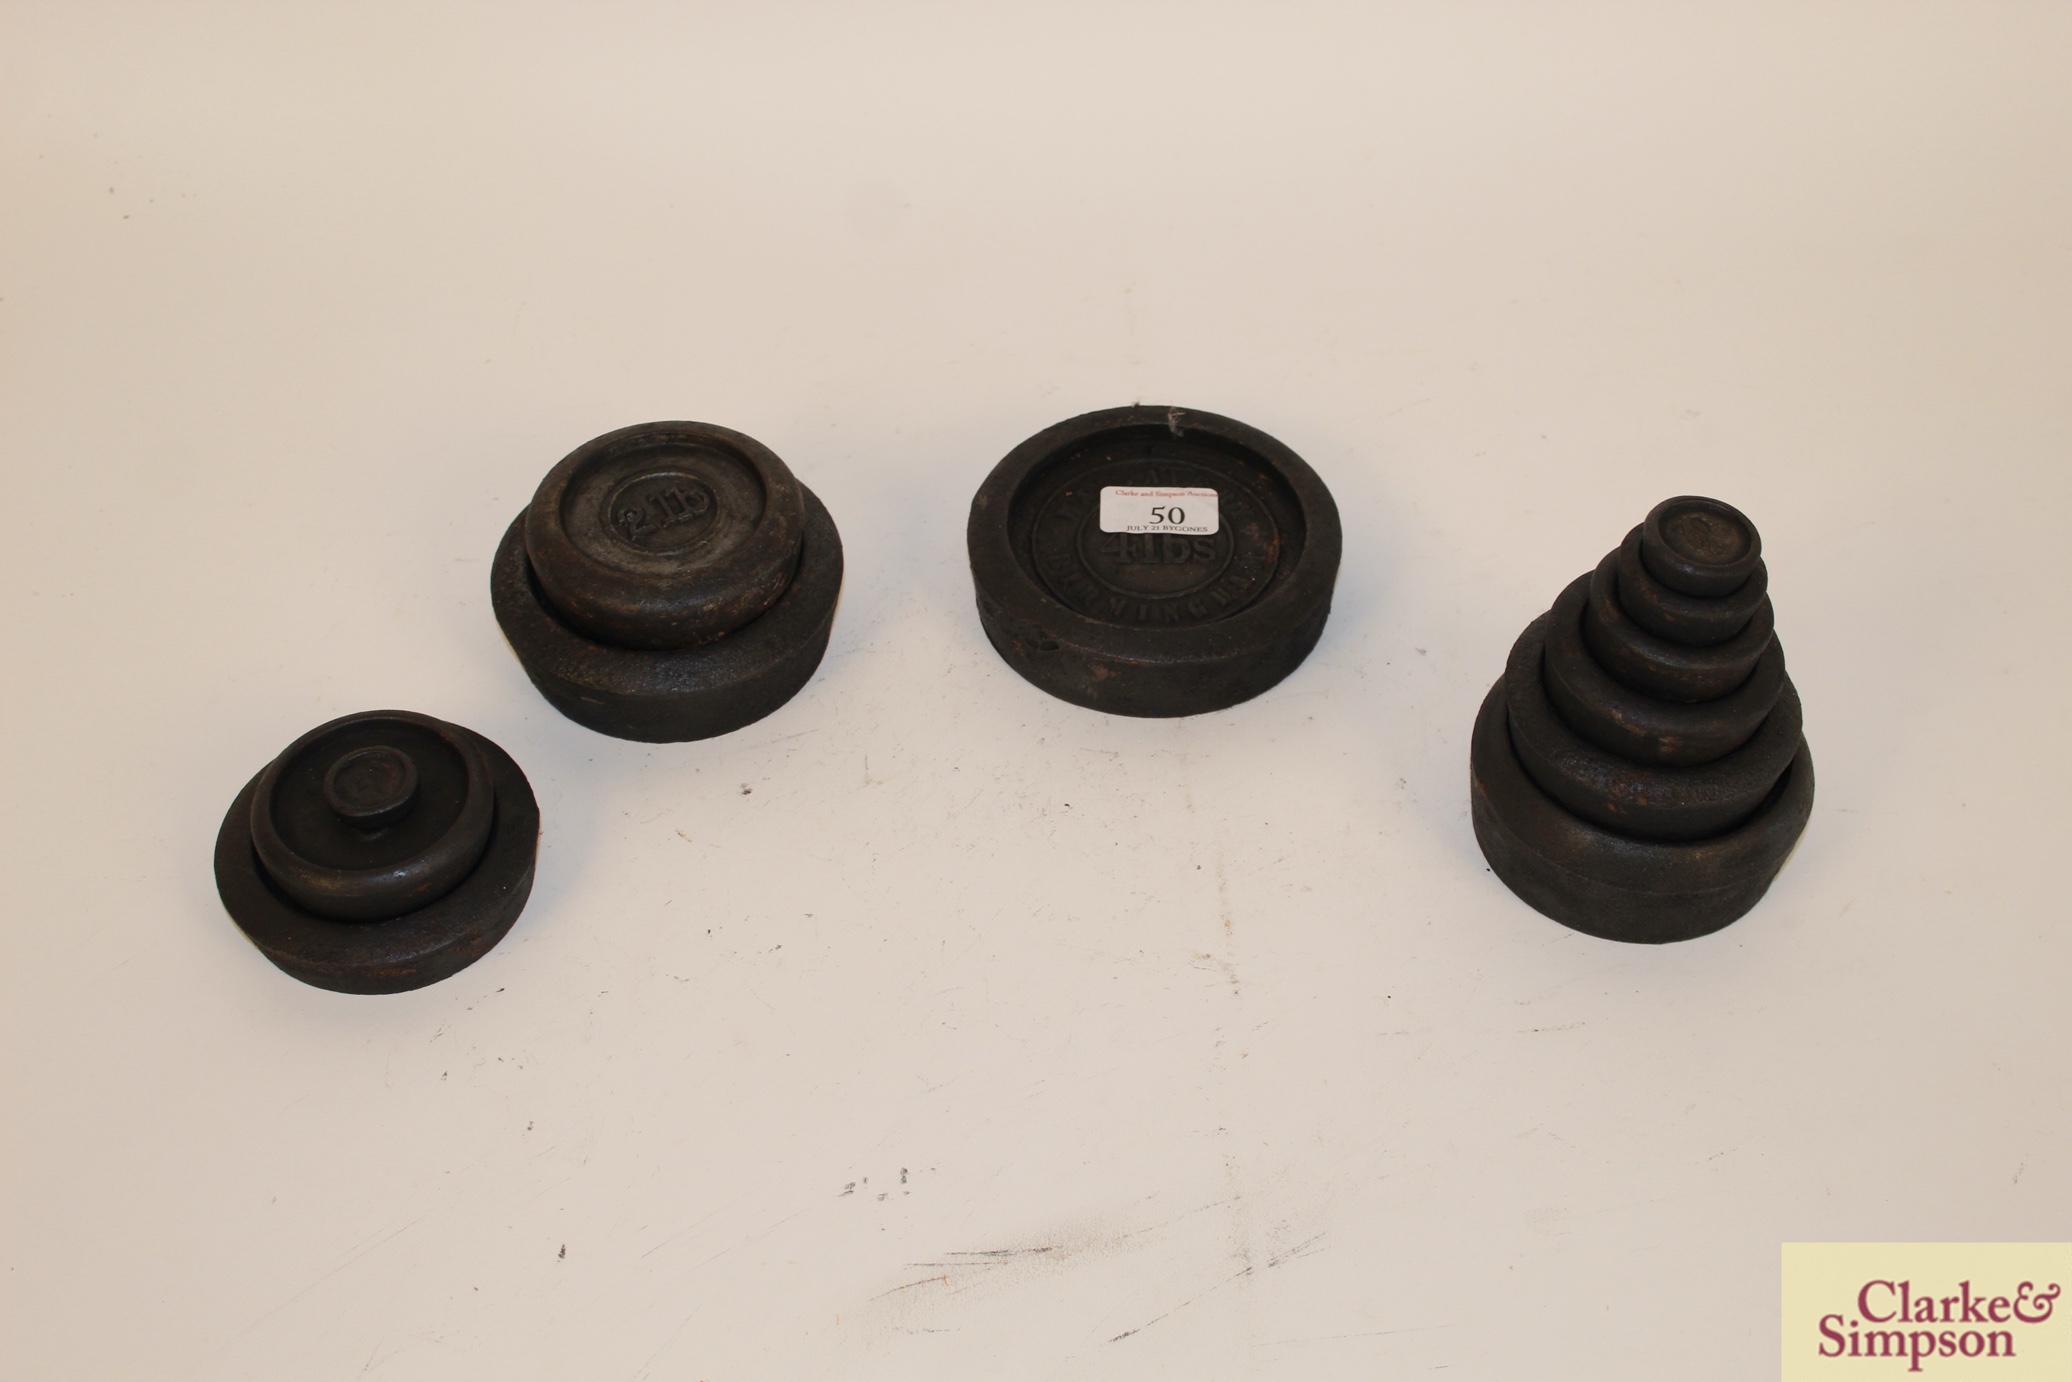 A collection of various iron shop scale weights